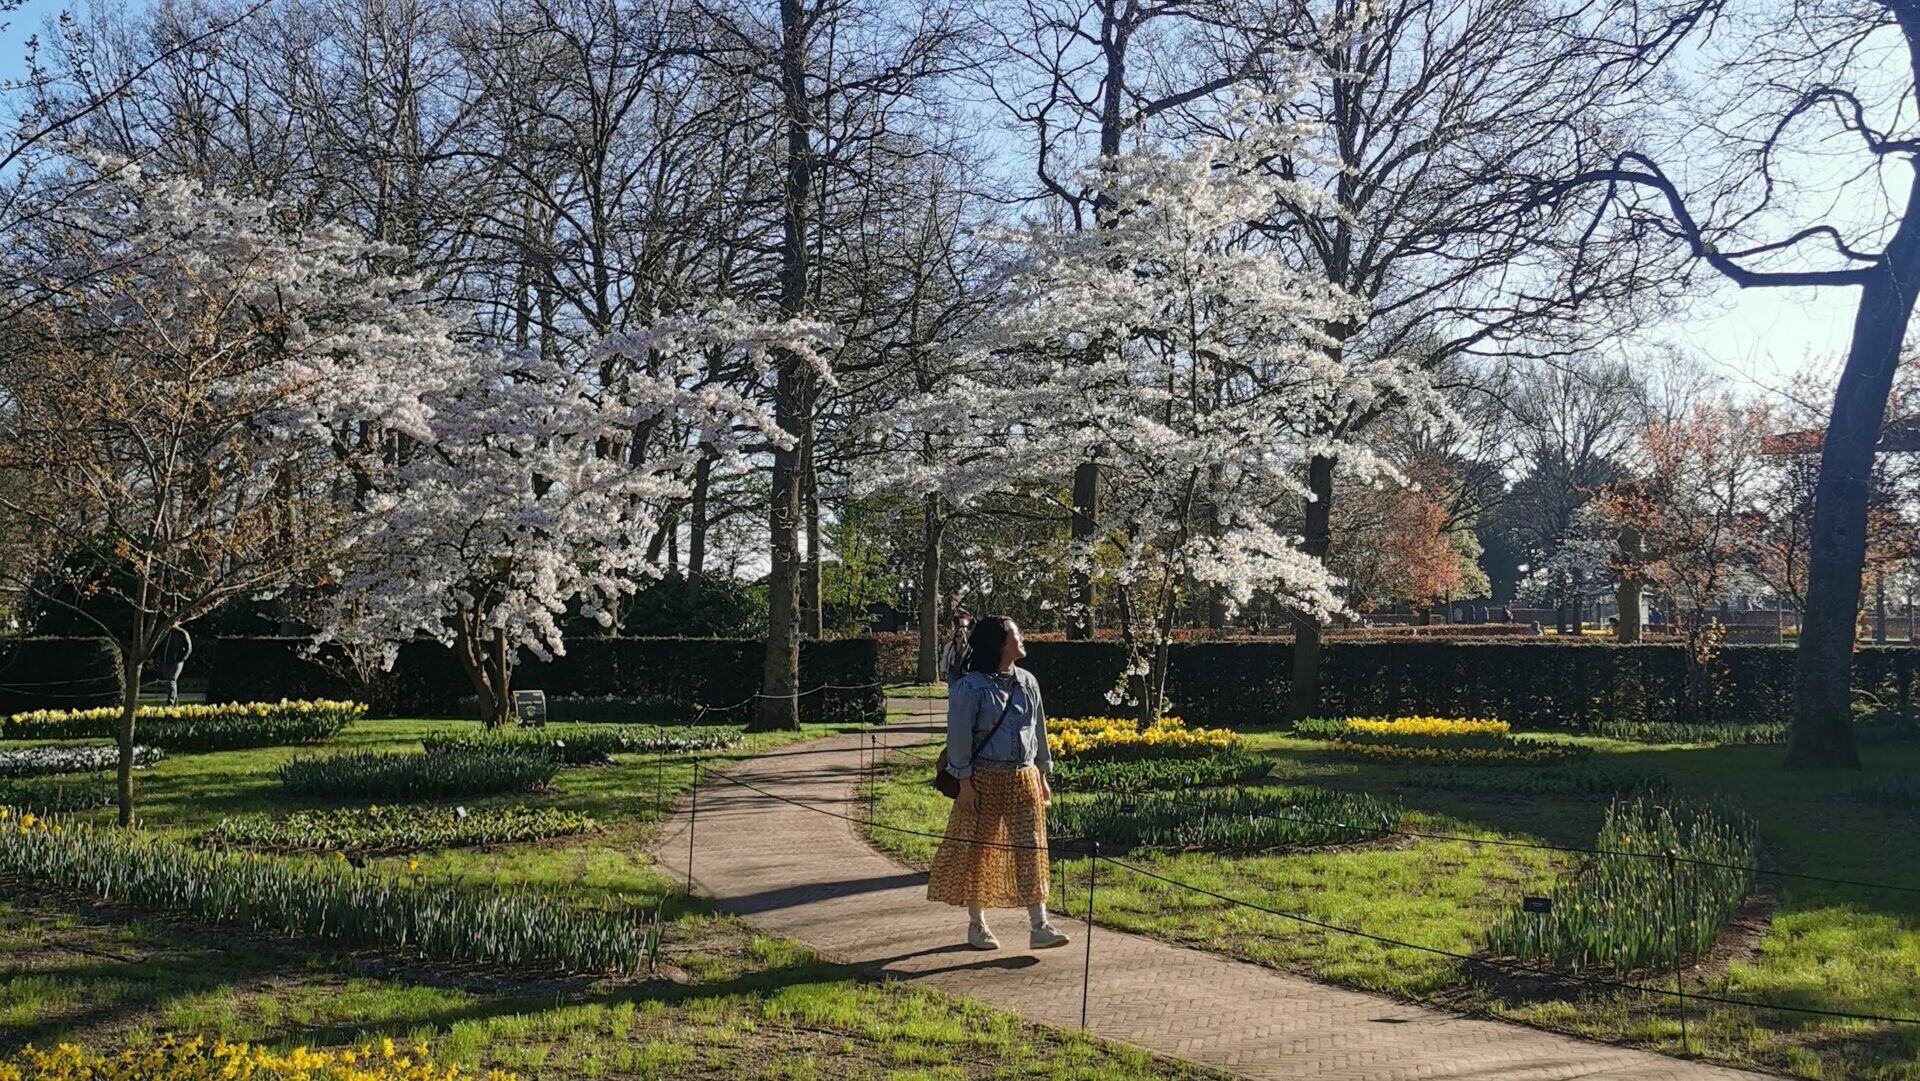 Before the Tulips: Early Spring at Keukenhof